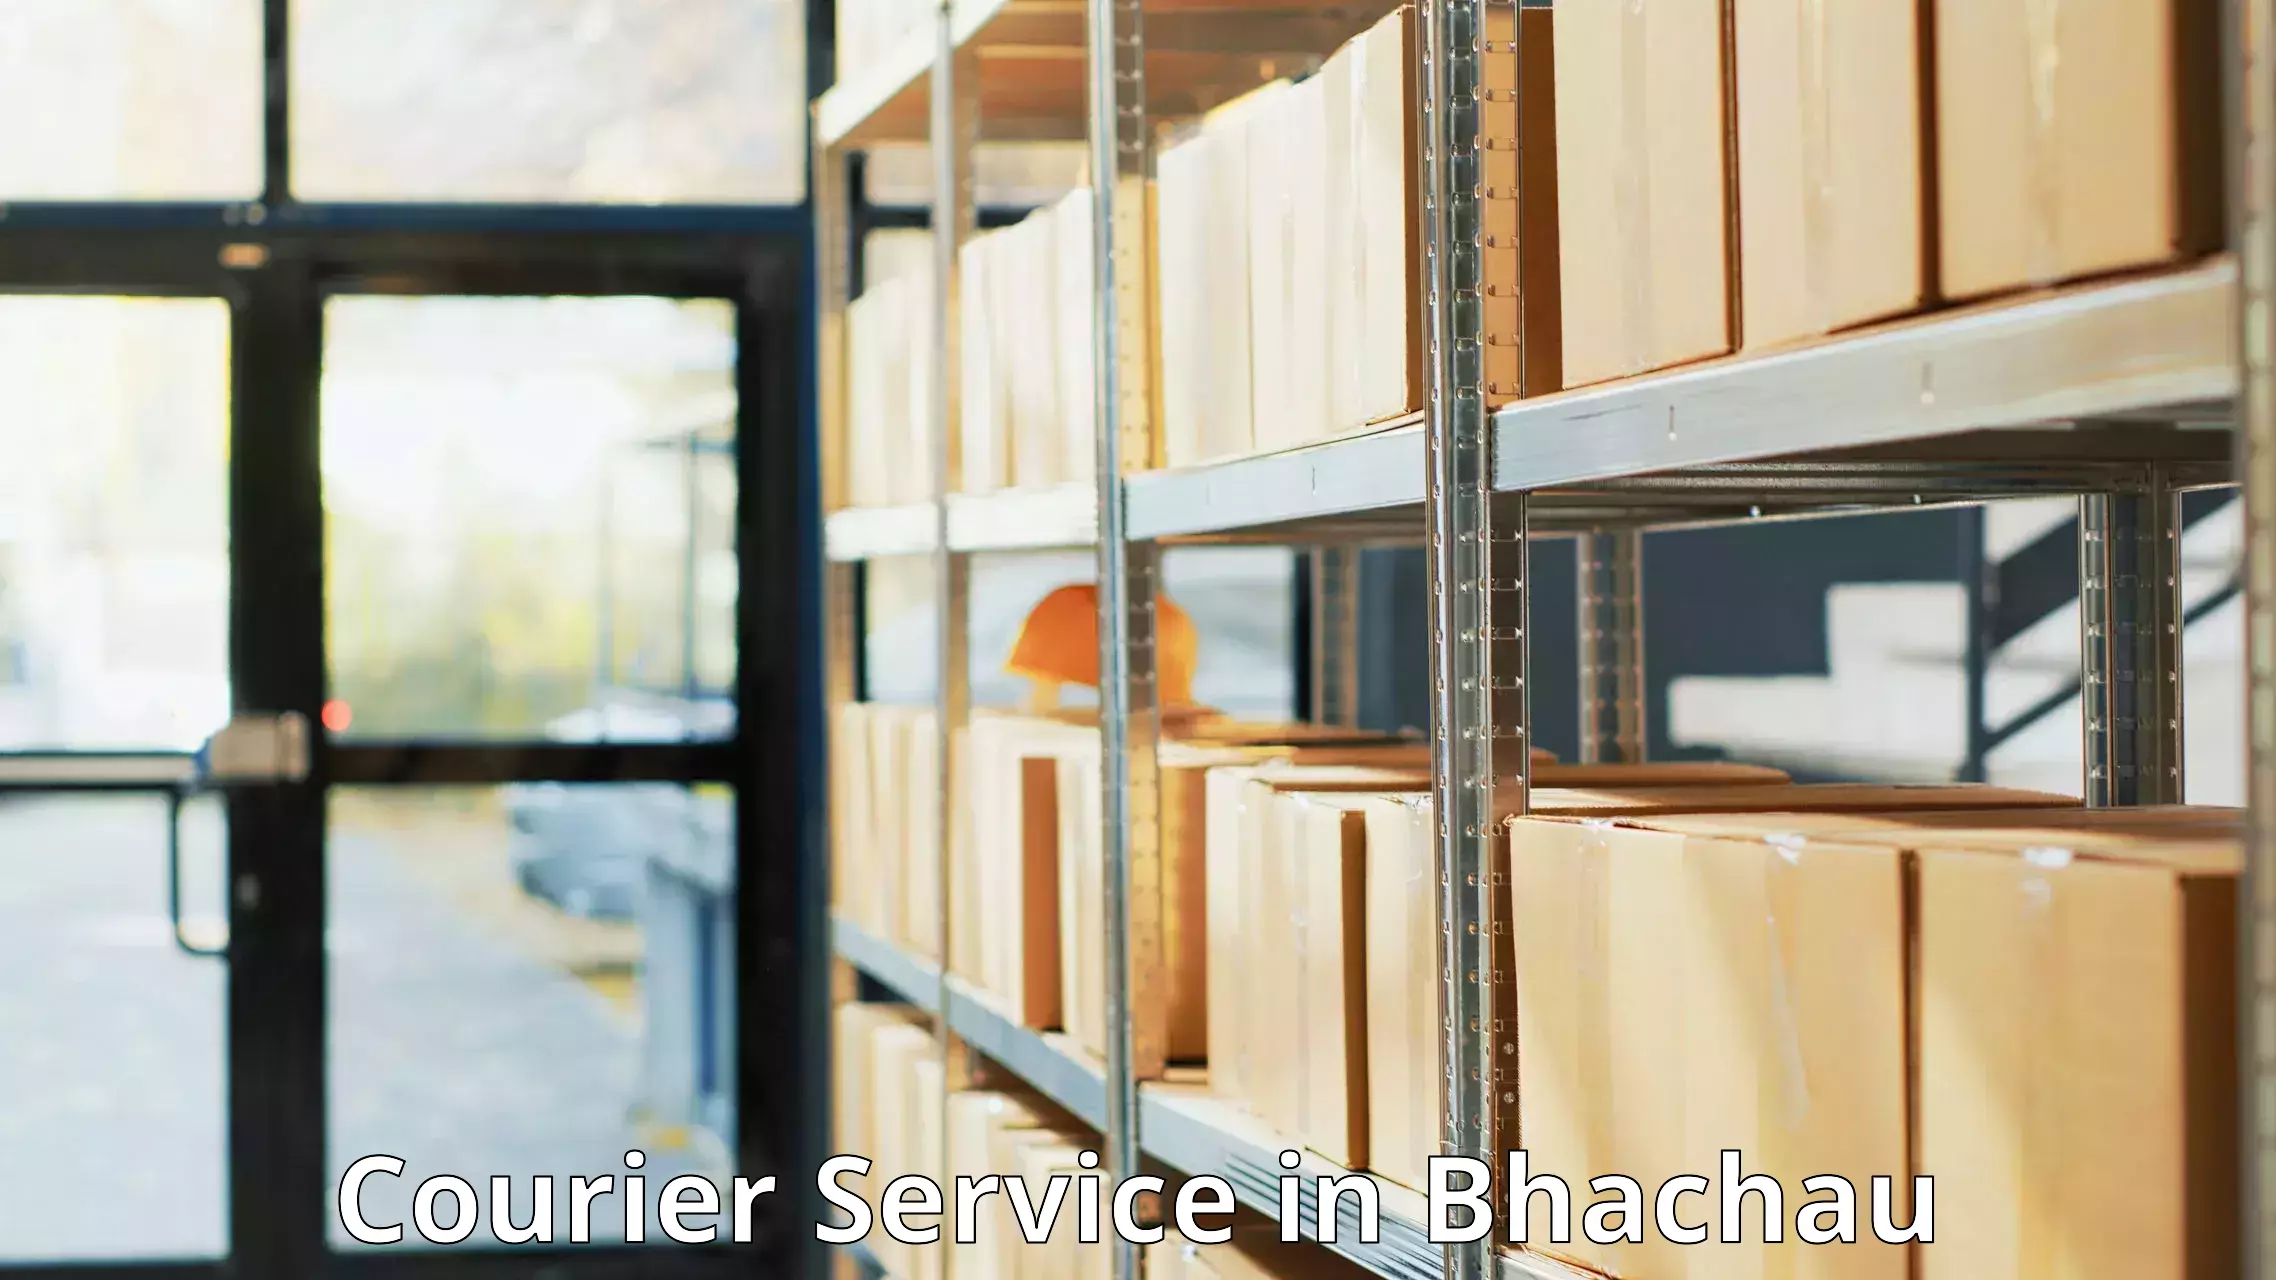 Reliable delivery network in Bhachau